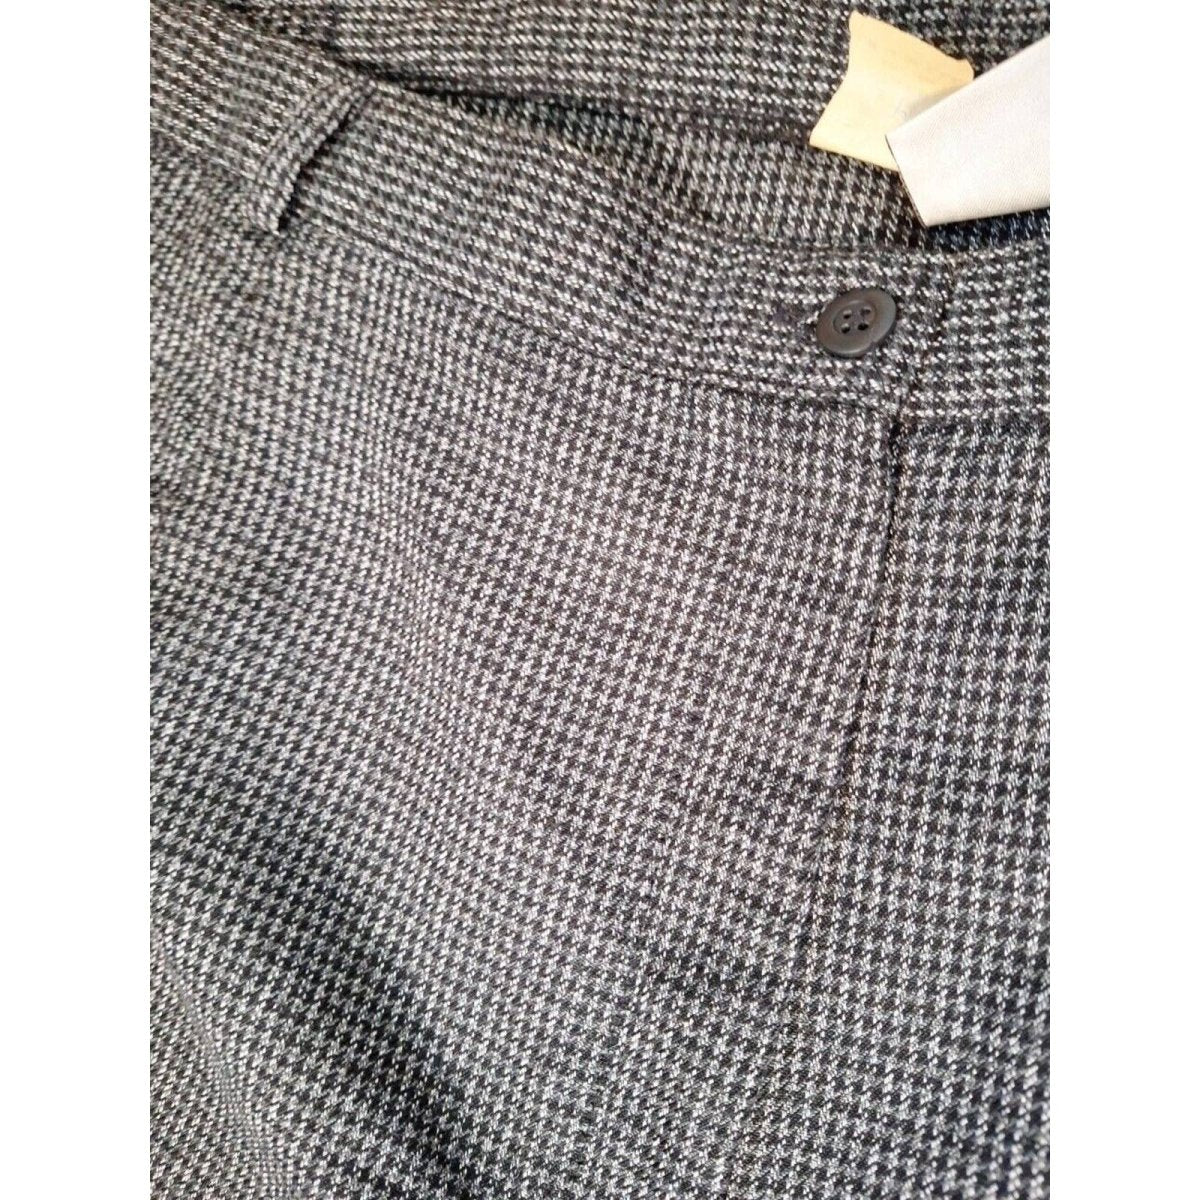 Vintage 80s/90s Houndstooth Trousers Women Size 26/28 3X/4X Waist 48" to 50" - themallvintage The Mall Vintage